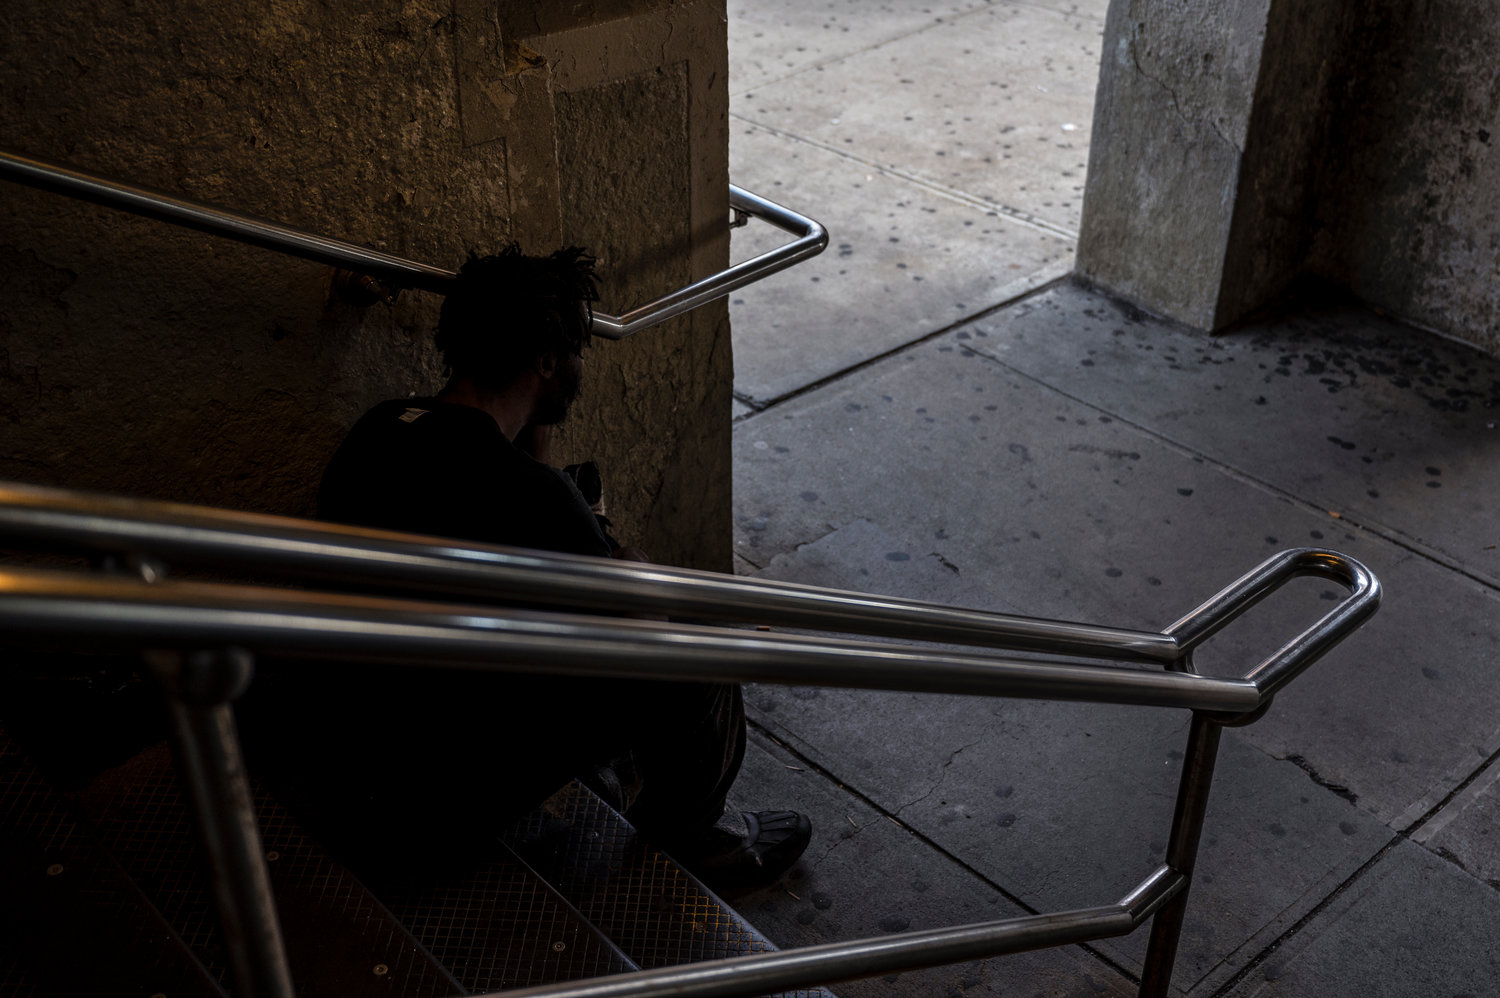 A homeless man sits on the steps of Woodlawn’s subway station just a stone's throw from a men's overnight shelter. Some in this part of the Bronx are concerned the city's hasty move to transfer homeless people back to congregate shelters and out of the hotels they stayed in during the height of the coronavirus pandemic may result in more loitering and trespassing issues, disrupting residential and retail neighborhoods.